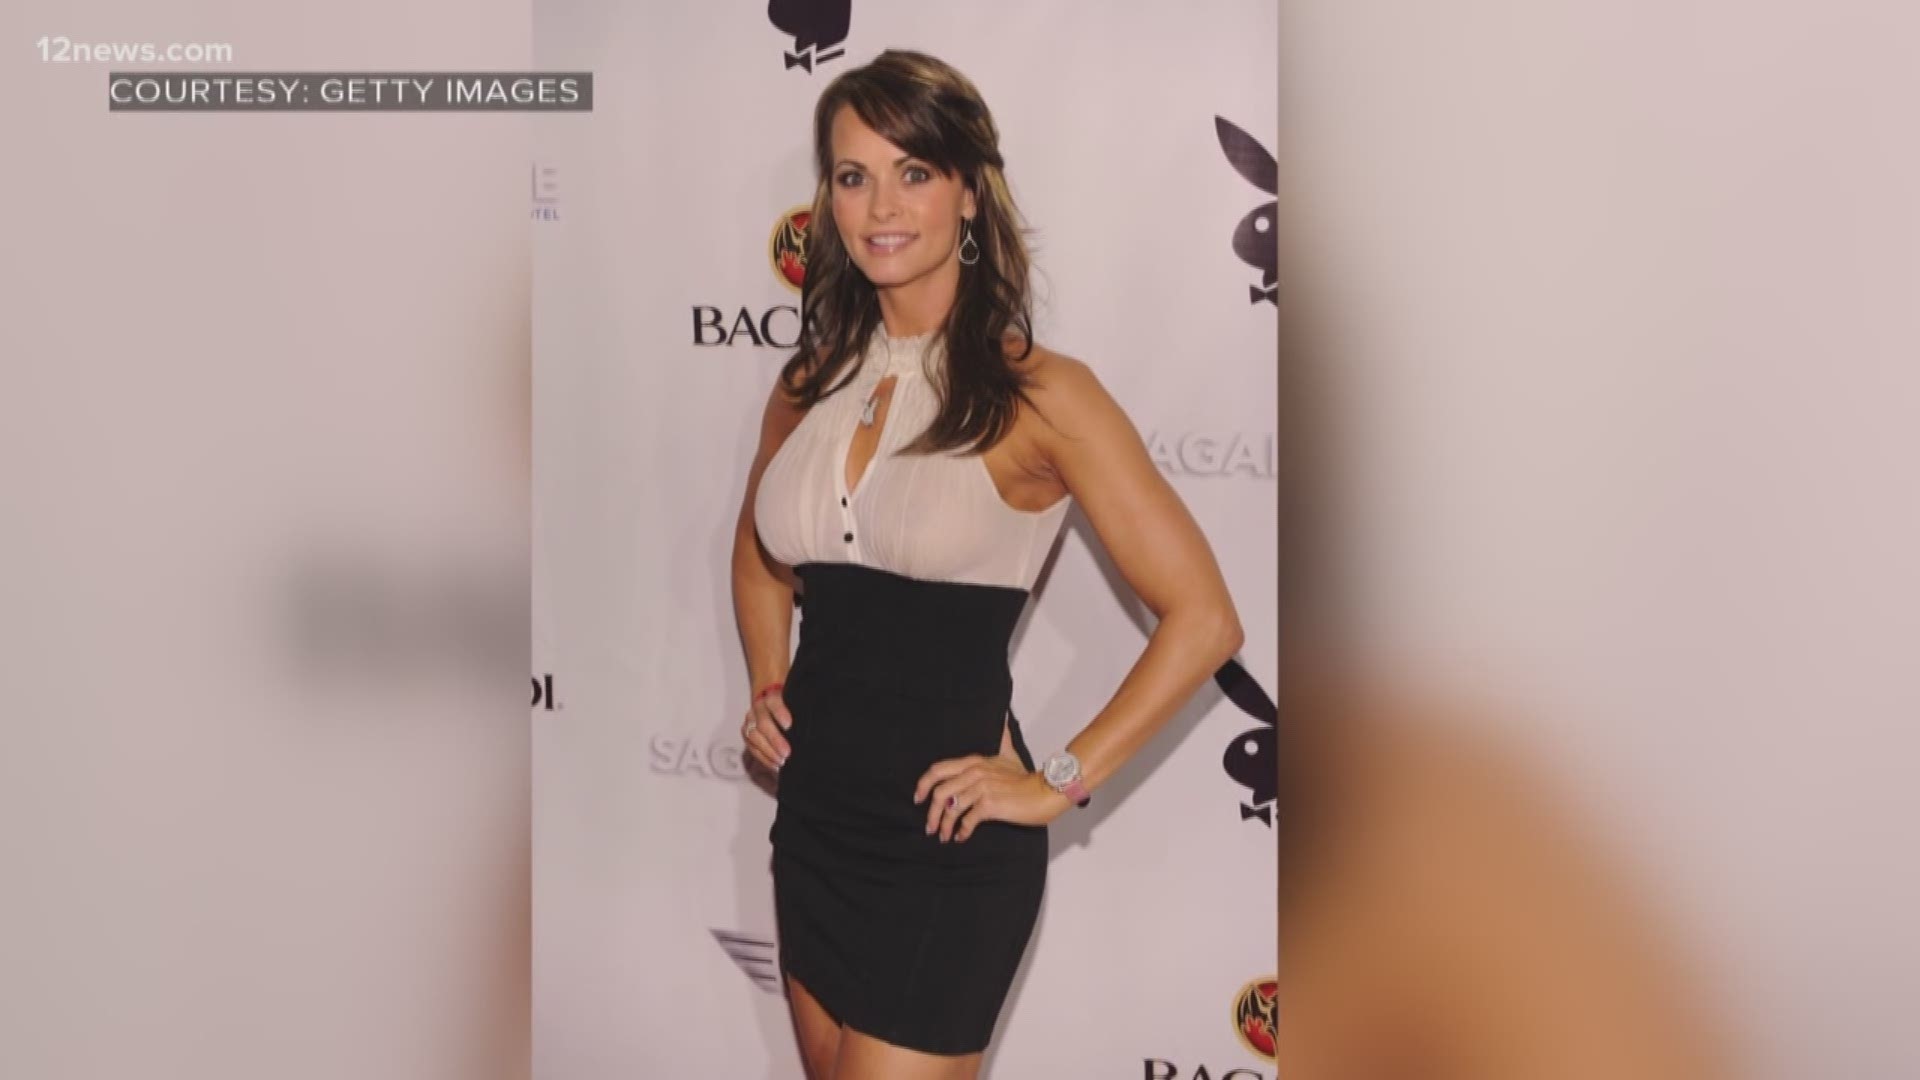 Karen McDougal, the Valley Playboy model, revealed in an interview with CNN that she had ten-month sexual relationship with Donald Trump before he was president.